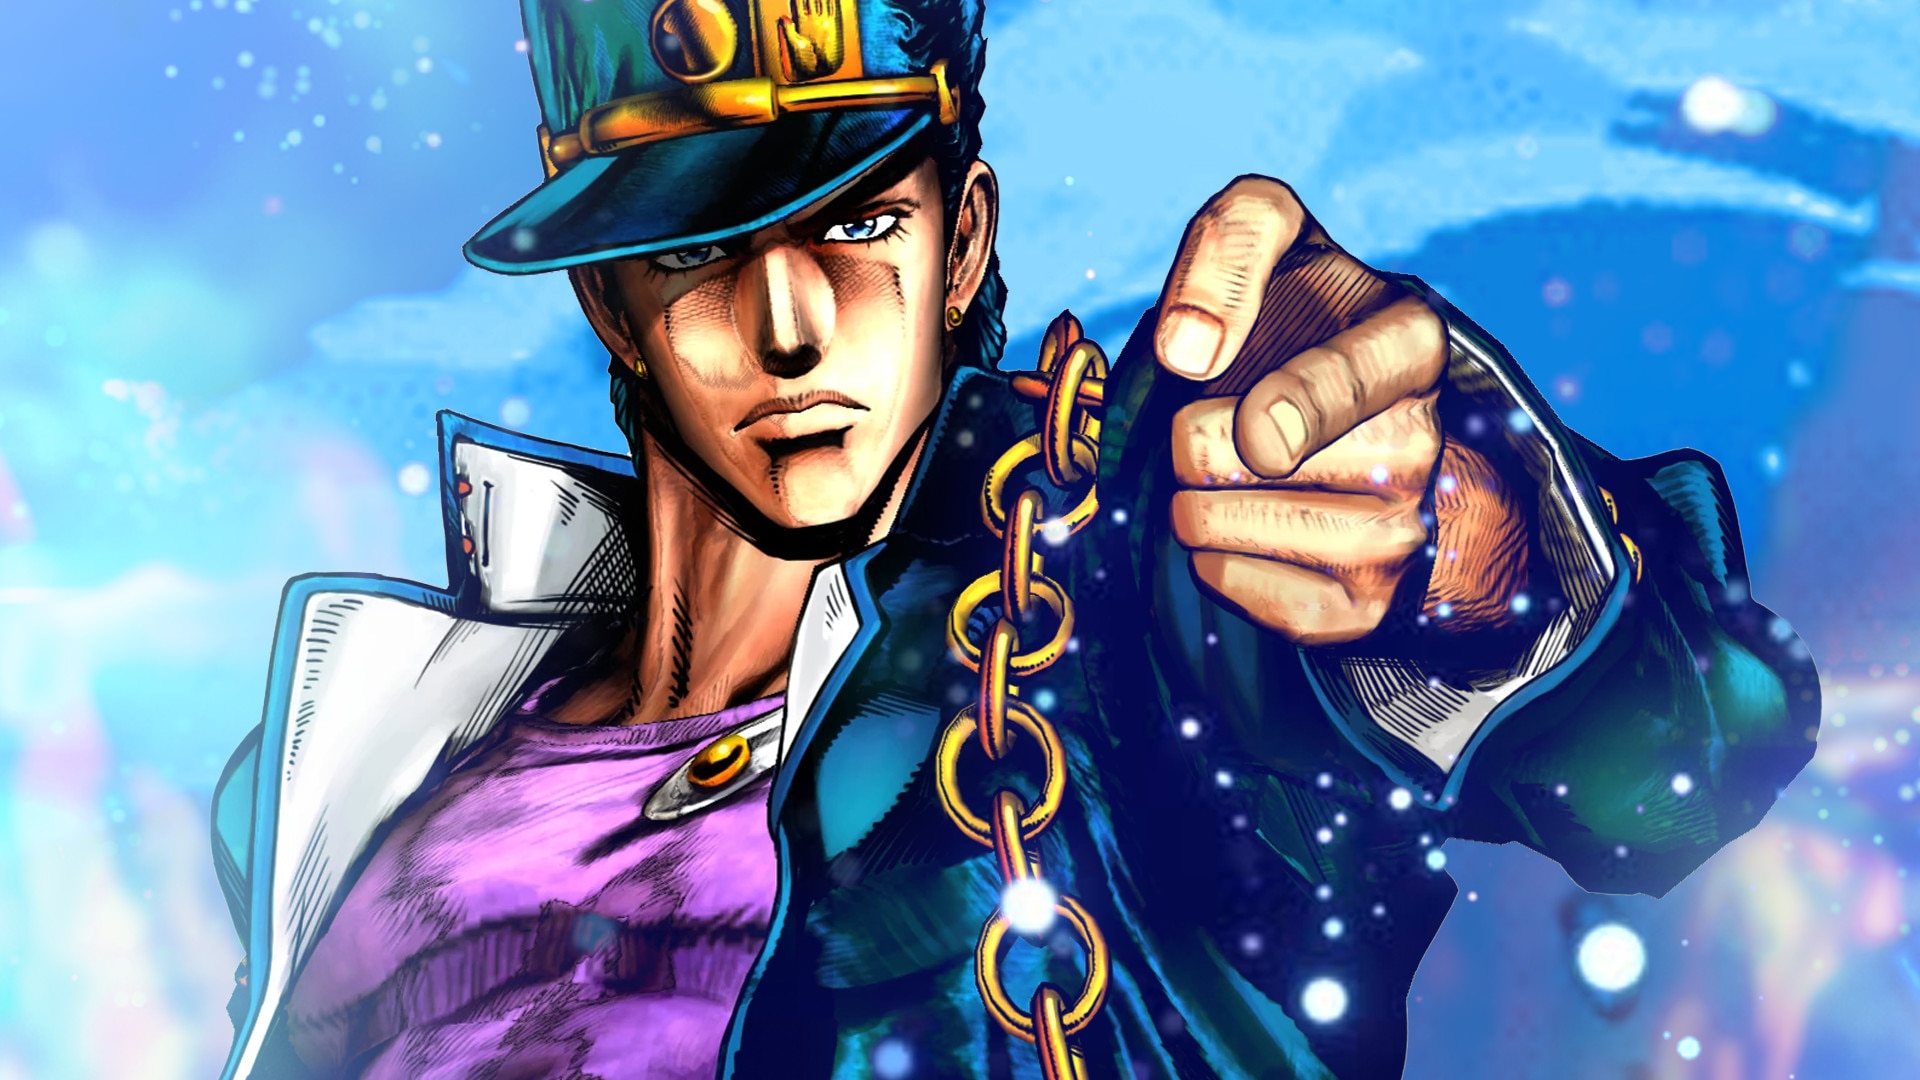 arts — I MADE A CHILL JOJO DISCORD SERVER TO CHAT, COME